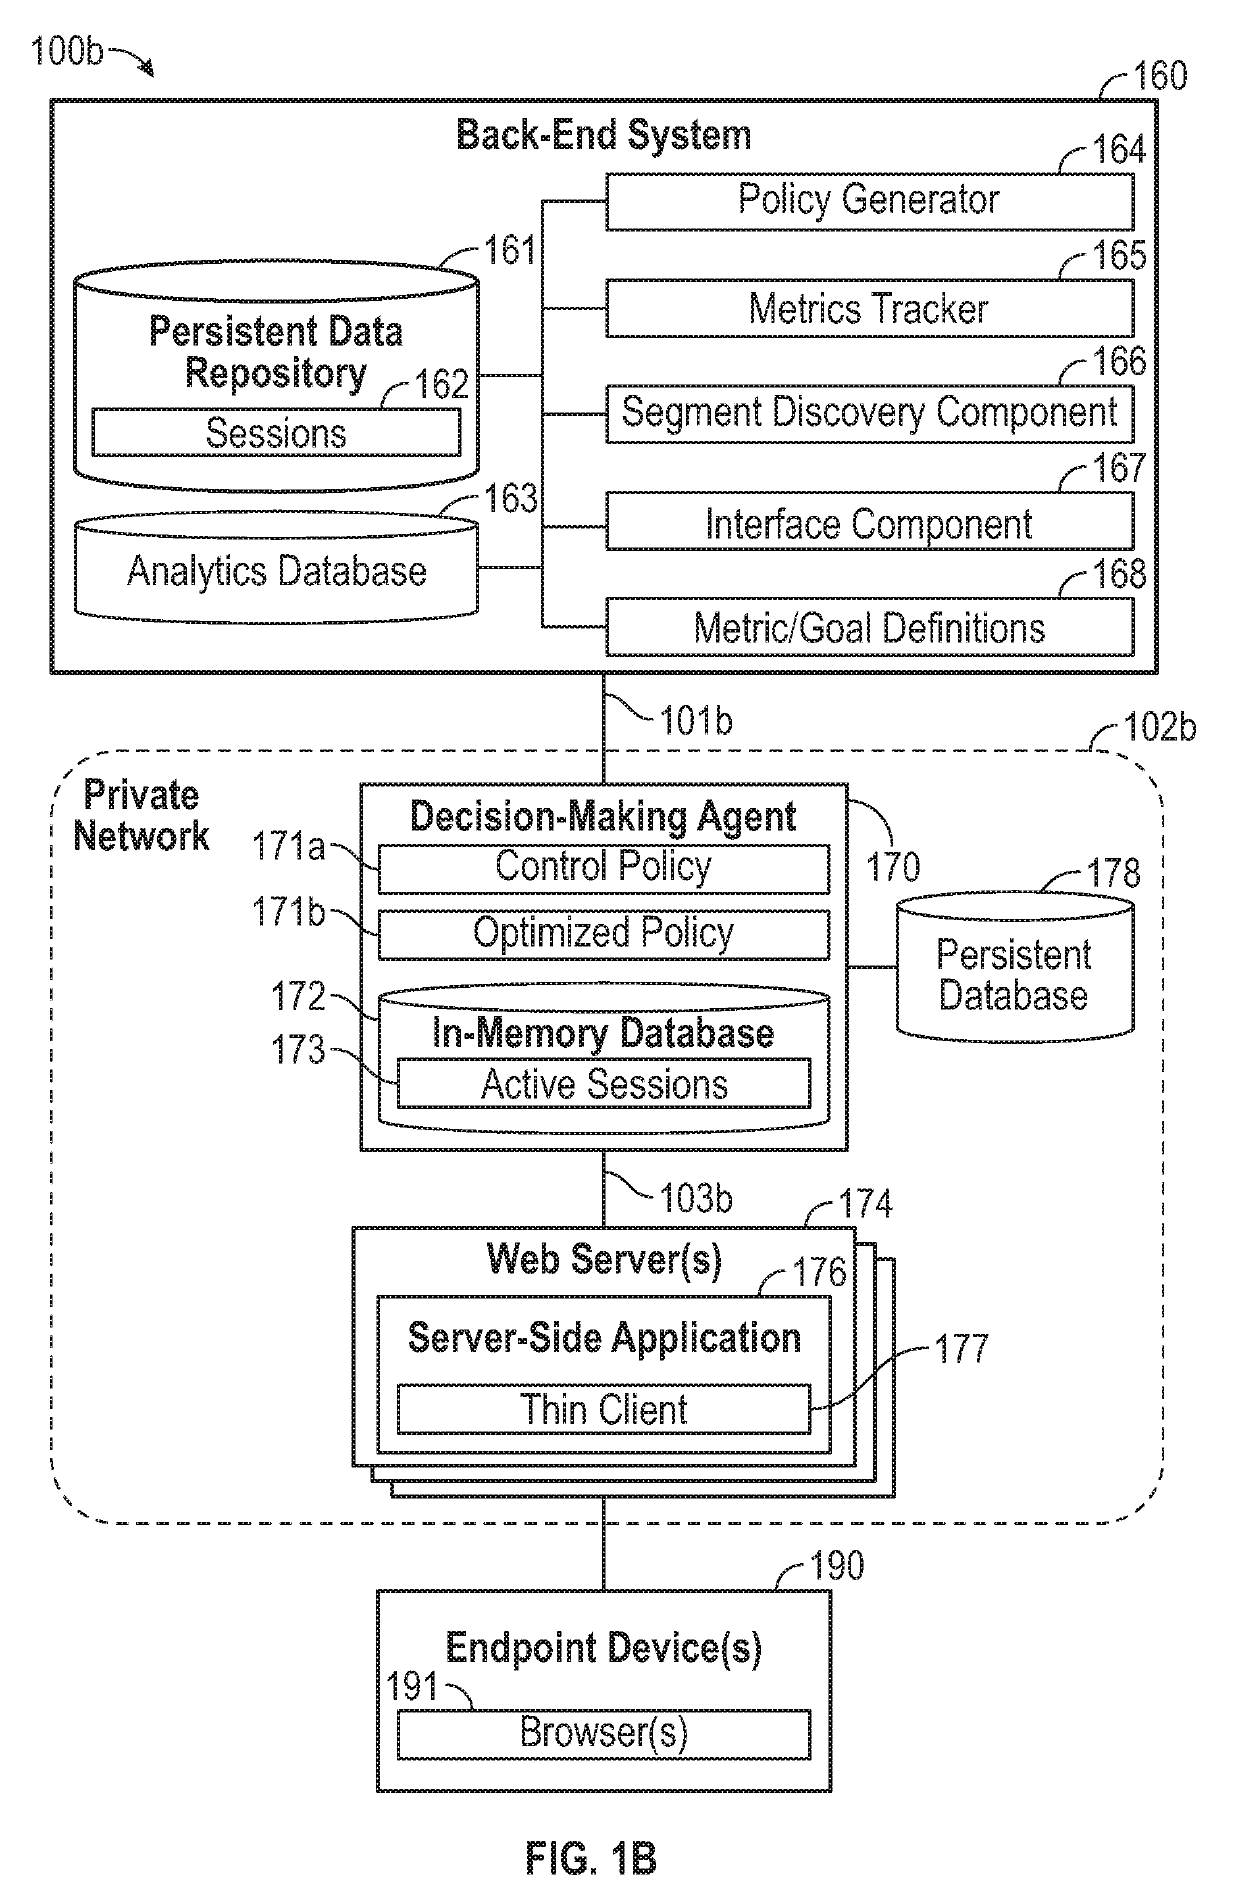 Methods and systems for transforming computing analytics frameworks into cross-platform real-time decision-making systems through a decision-making agent